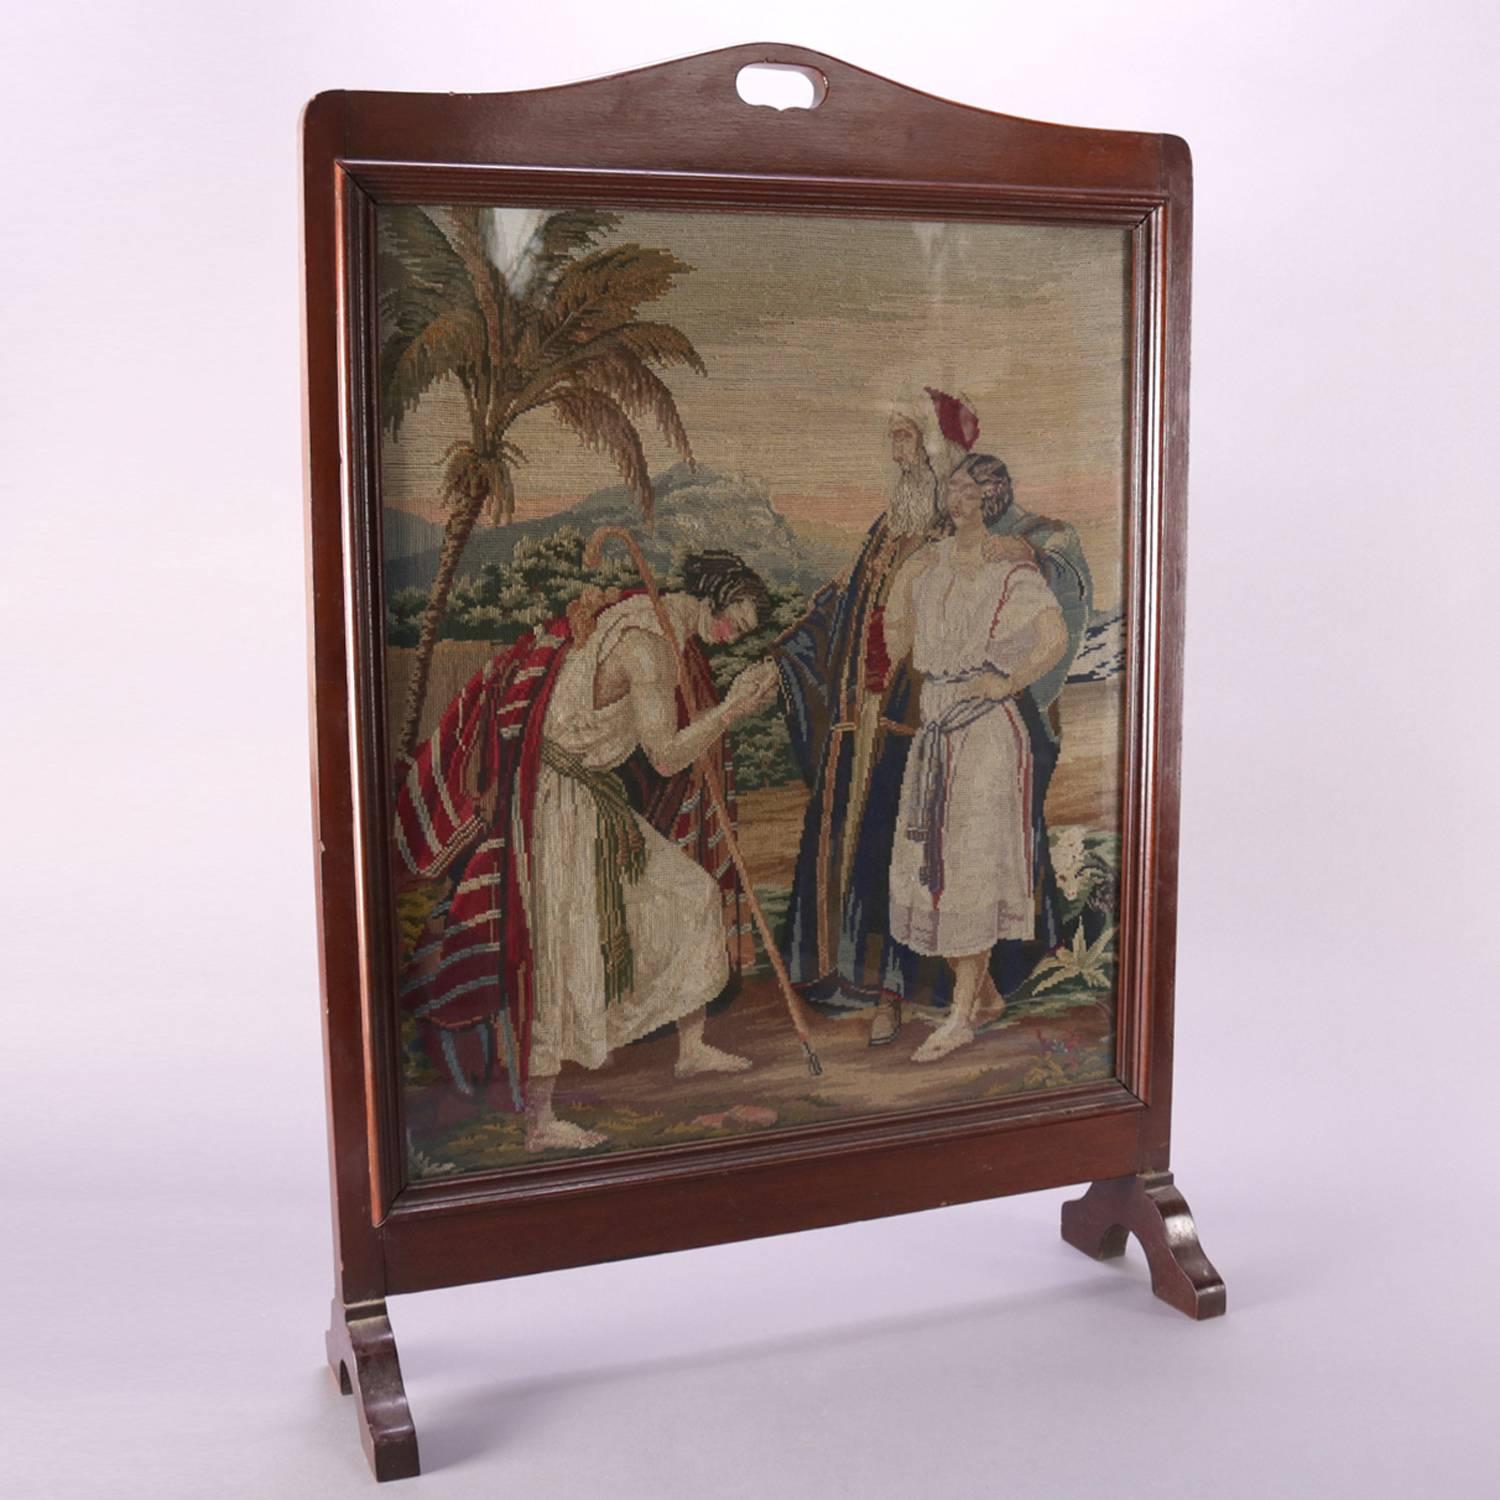 Antique Victorian fire screen features mahogany frame housing pictorial needlepoint depicting Biblical Old Testament account of Laban’s giving of Leah (or later Rachel) to Jacob to marry(Bible, Genesis Chapter 29), circa 1890


Measures: 35